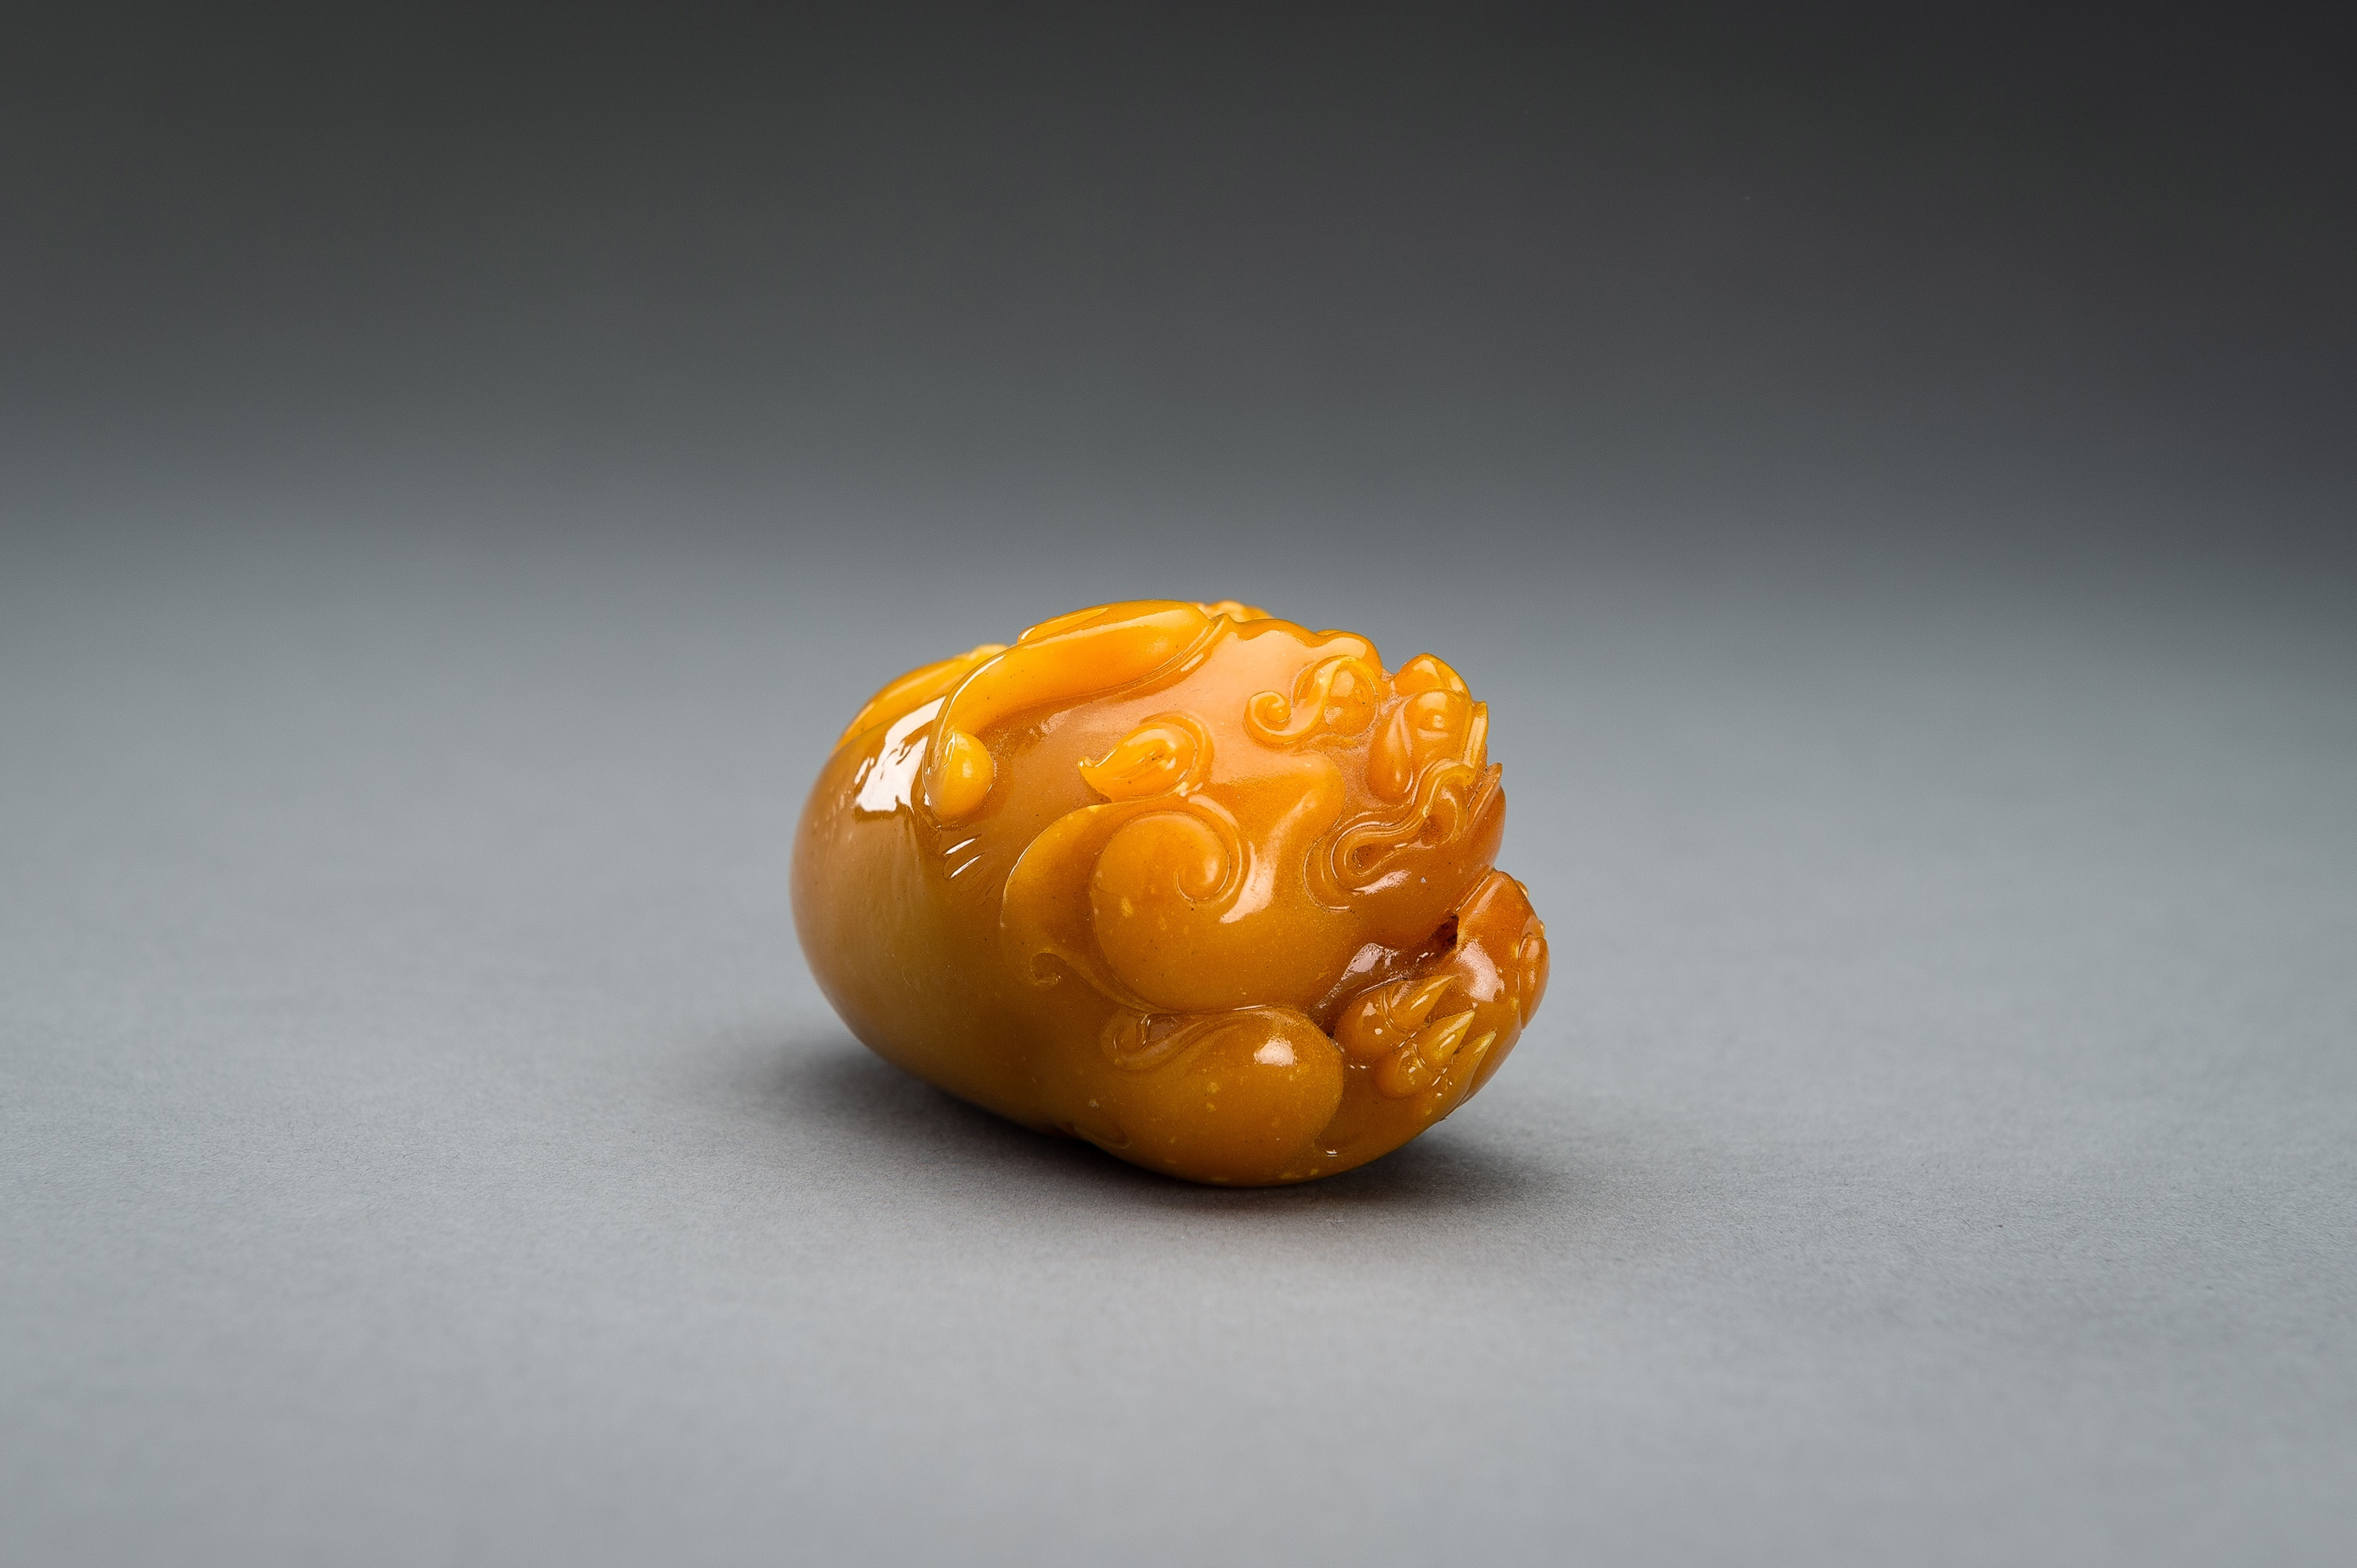 A 'TIANHUANG' GLASS FIGURE OF A BUDDHIST LION WITH CUB, c. 1920s - Image 7 of 10